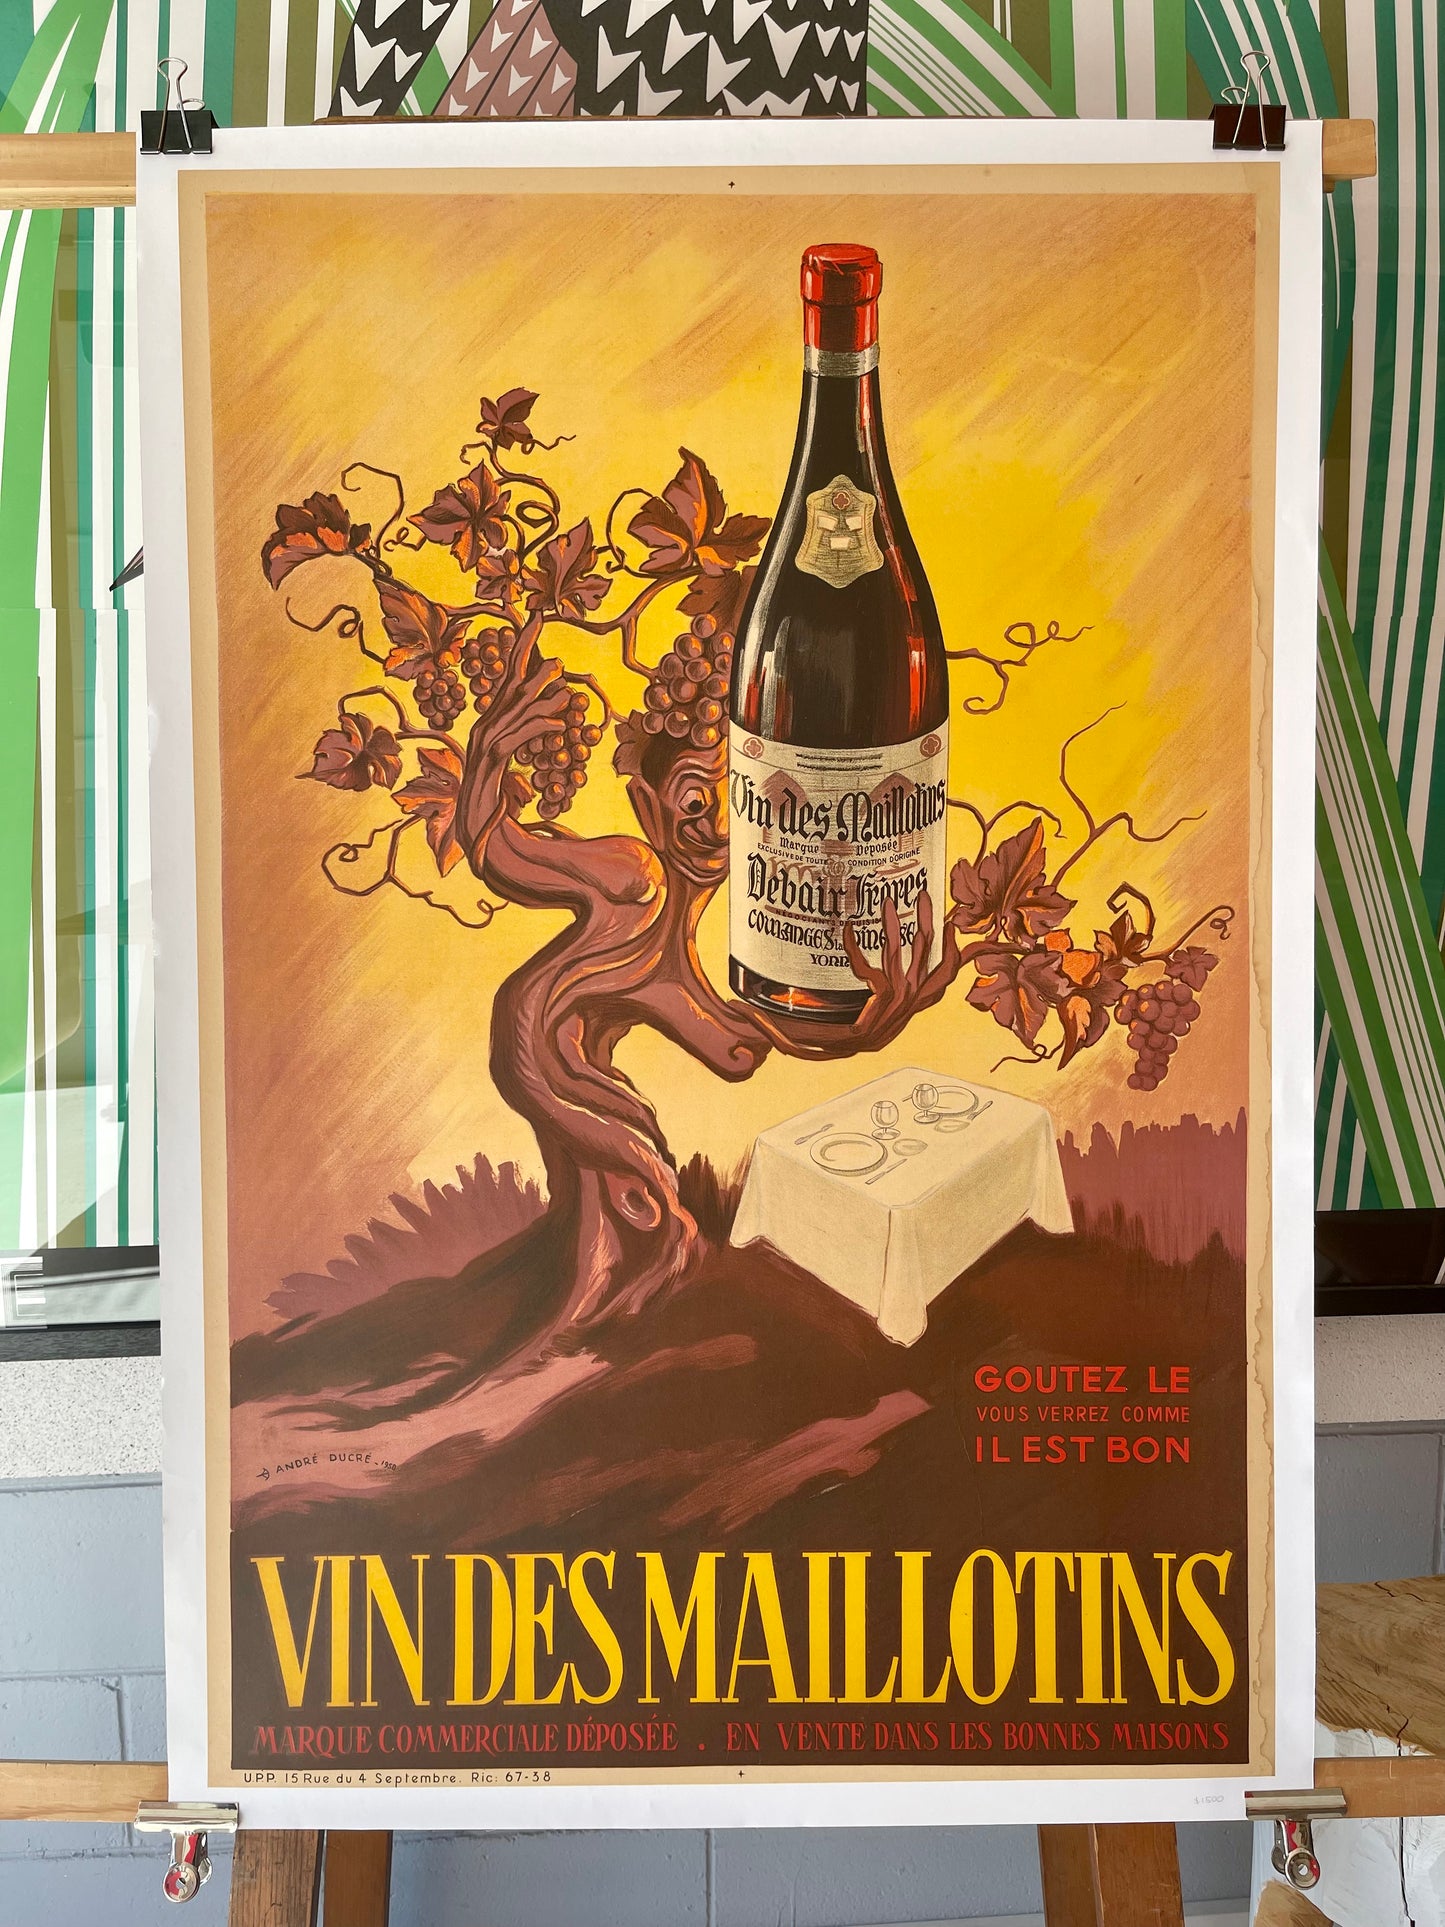 Vin de Maillotins by Andre Ducre